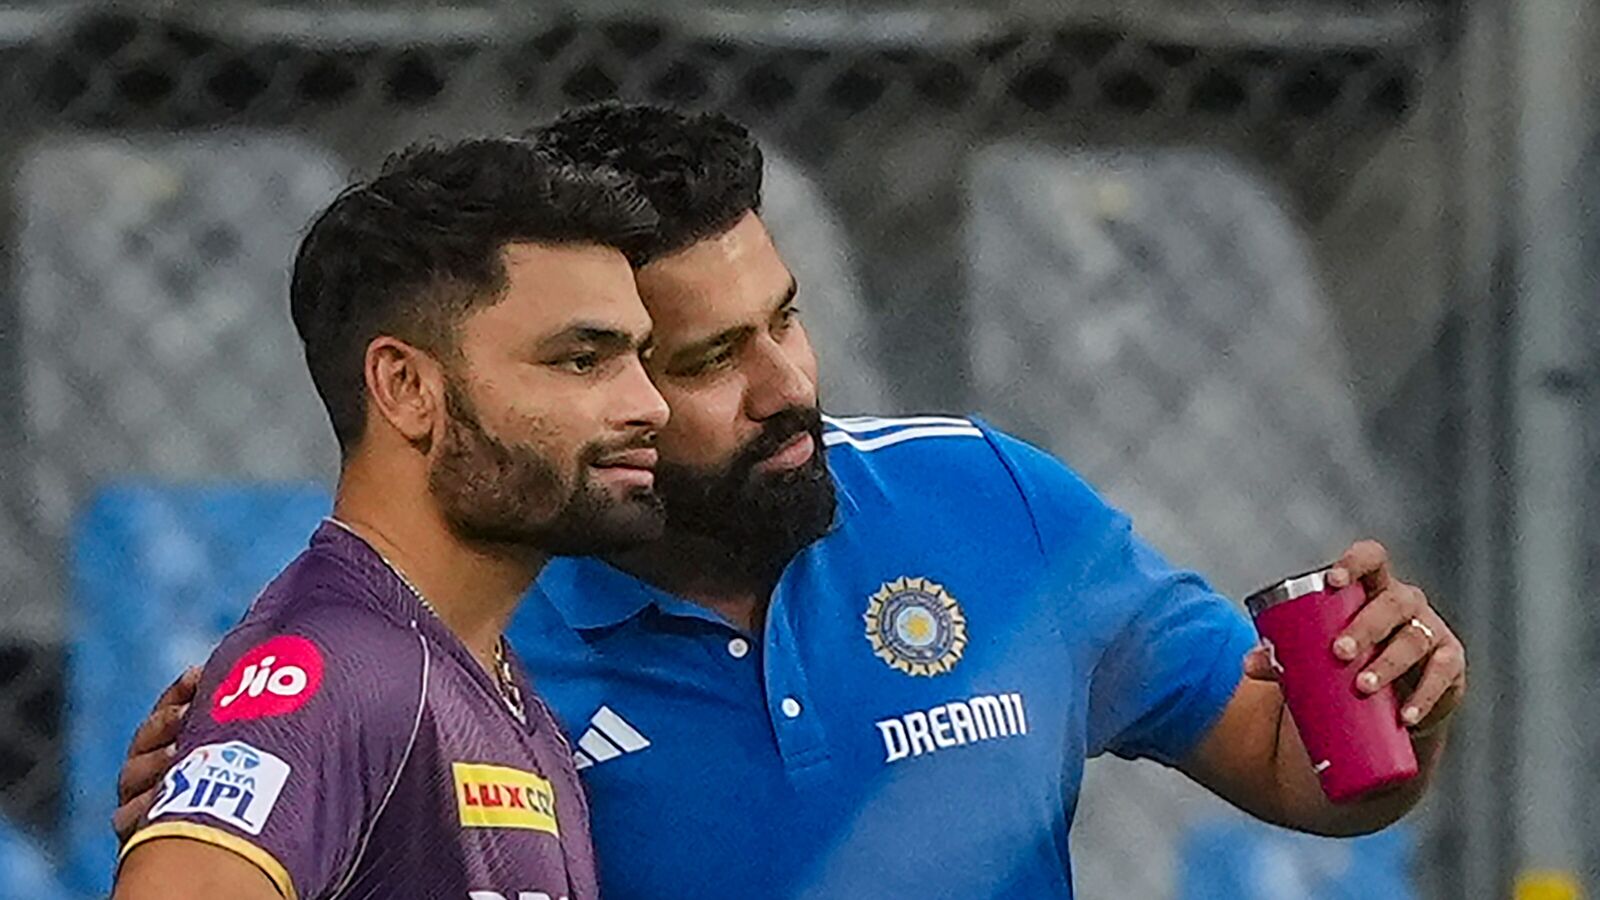 Rohit Sharma, Rinku Singh seen chatting ahead of KKR vs MI match; netizens speculate what they're talking about